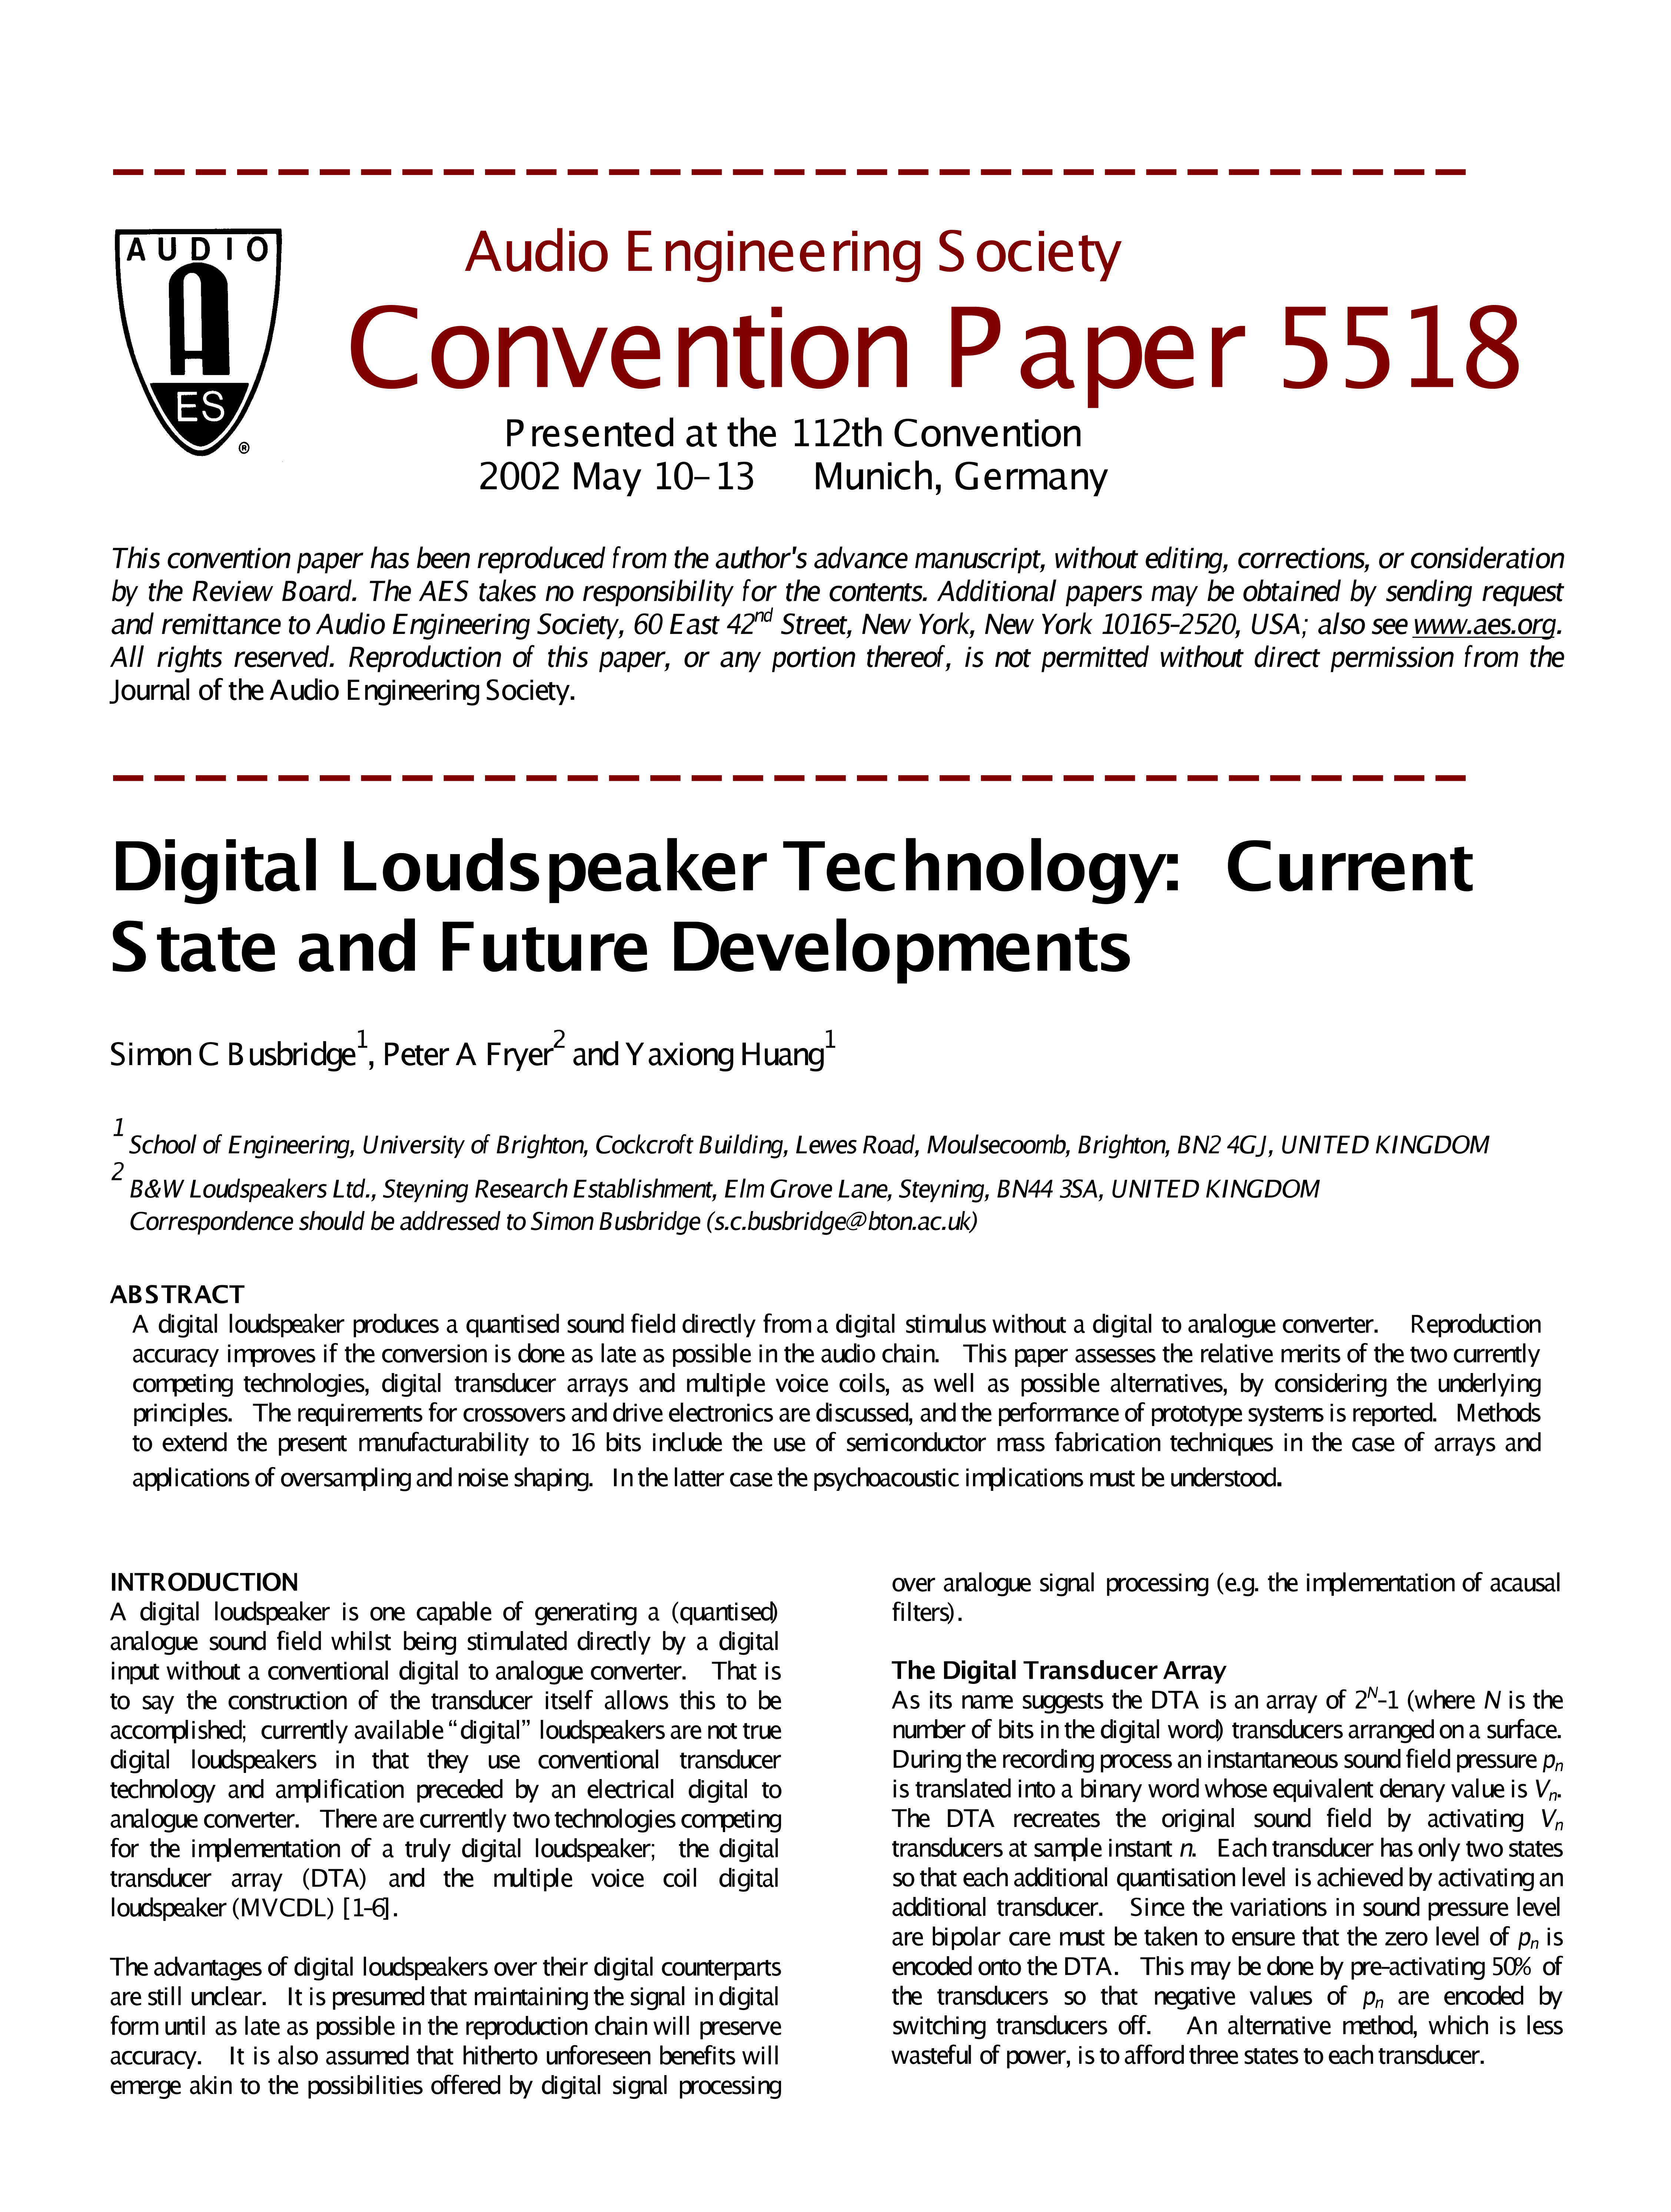 aes-e-library-digital-loudspeaker-technology-current-state-and